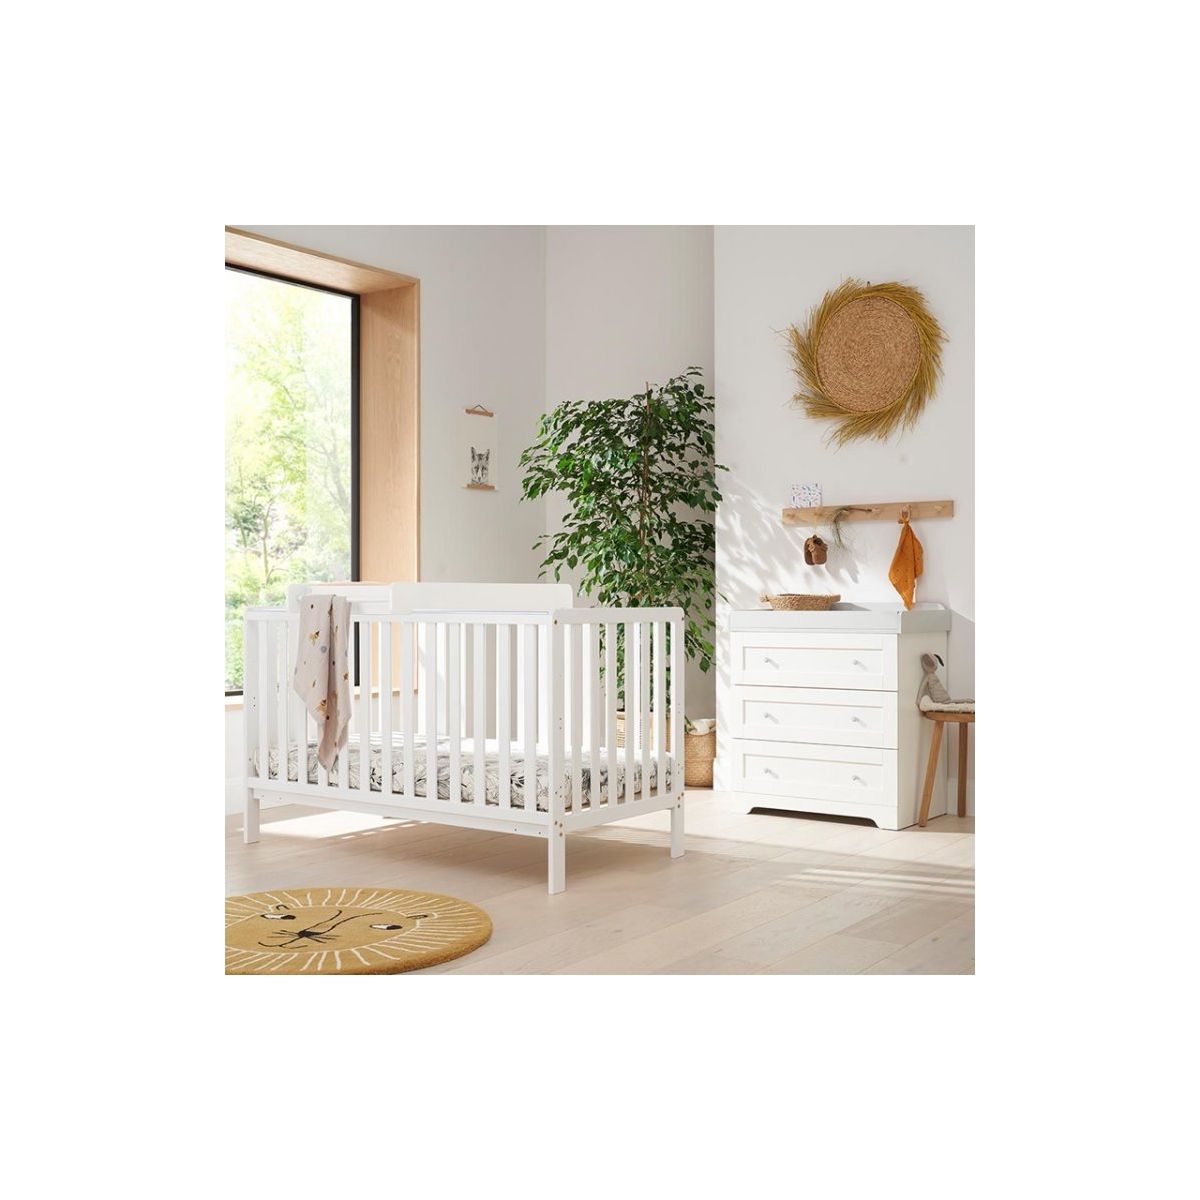 Tutti Bambini Malmo 2 Piece Room Set with Cot Top Changer